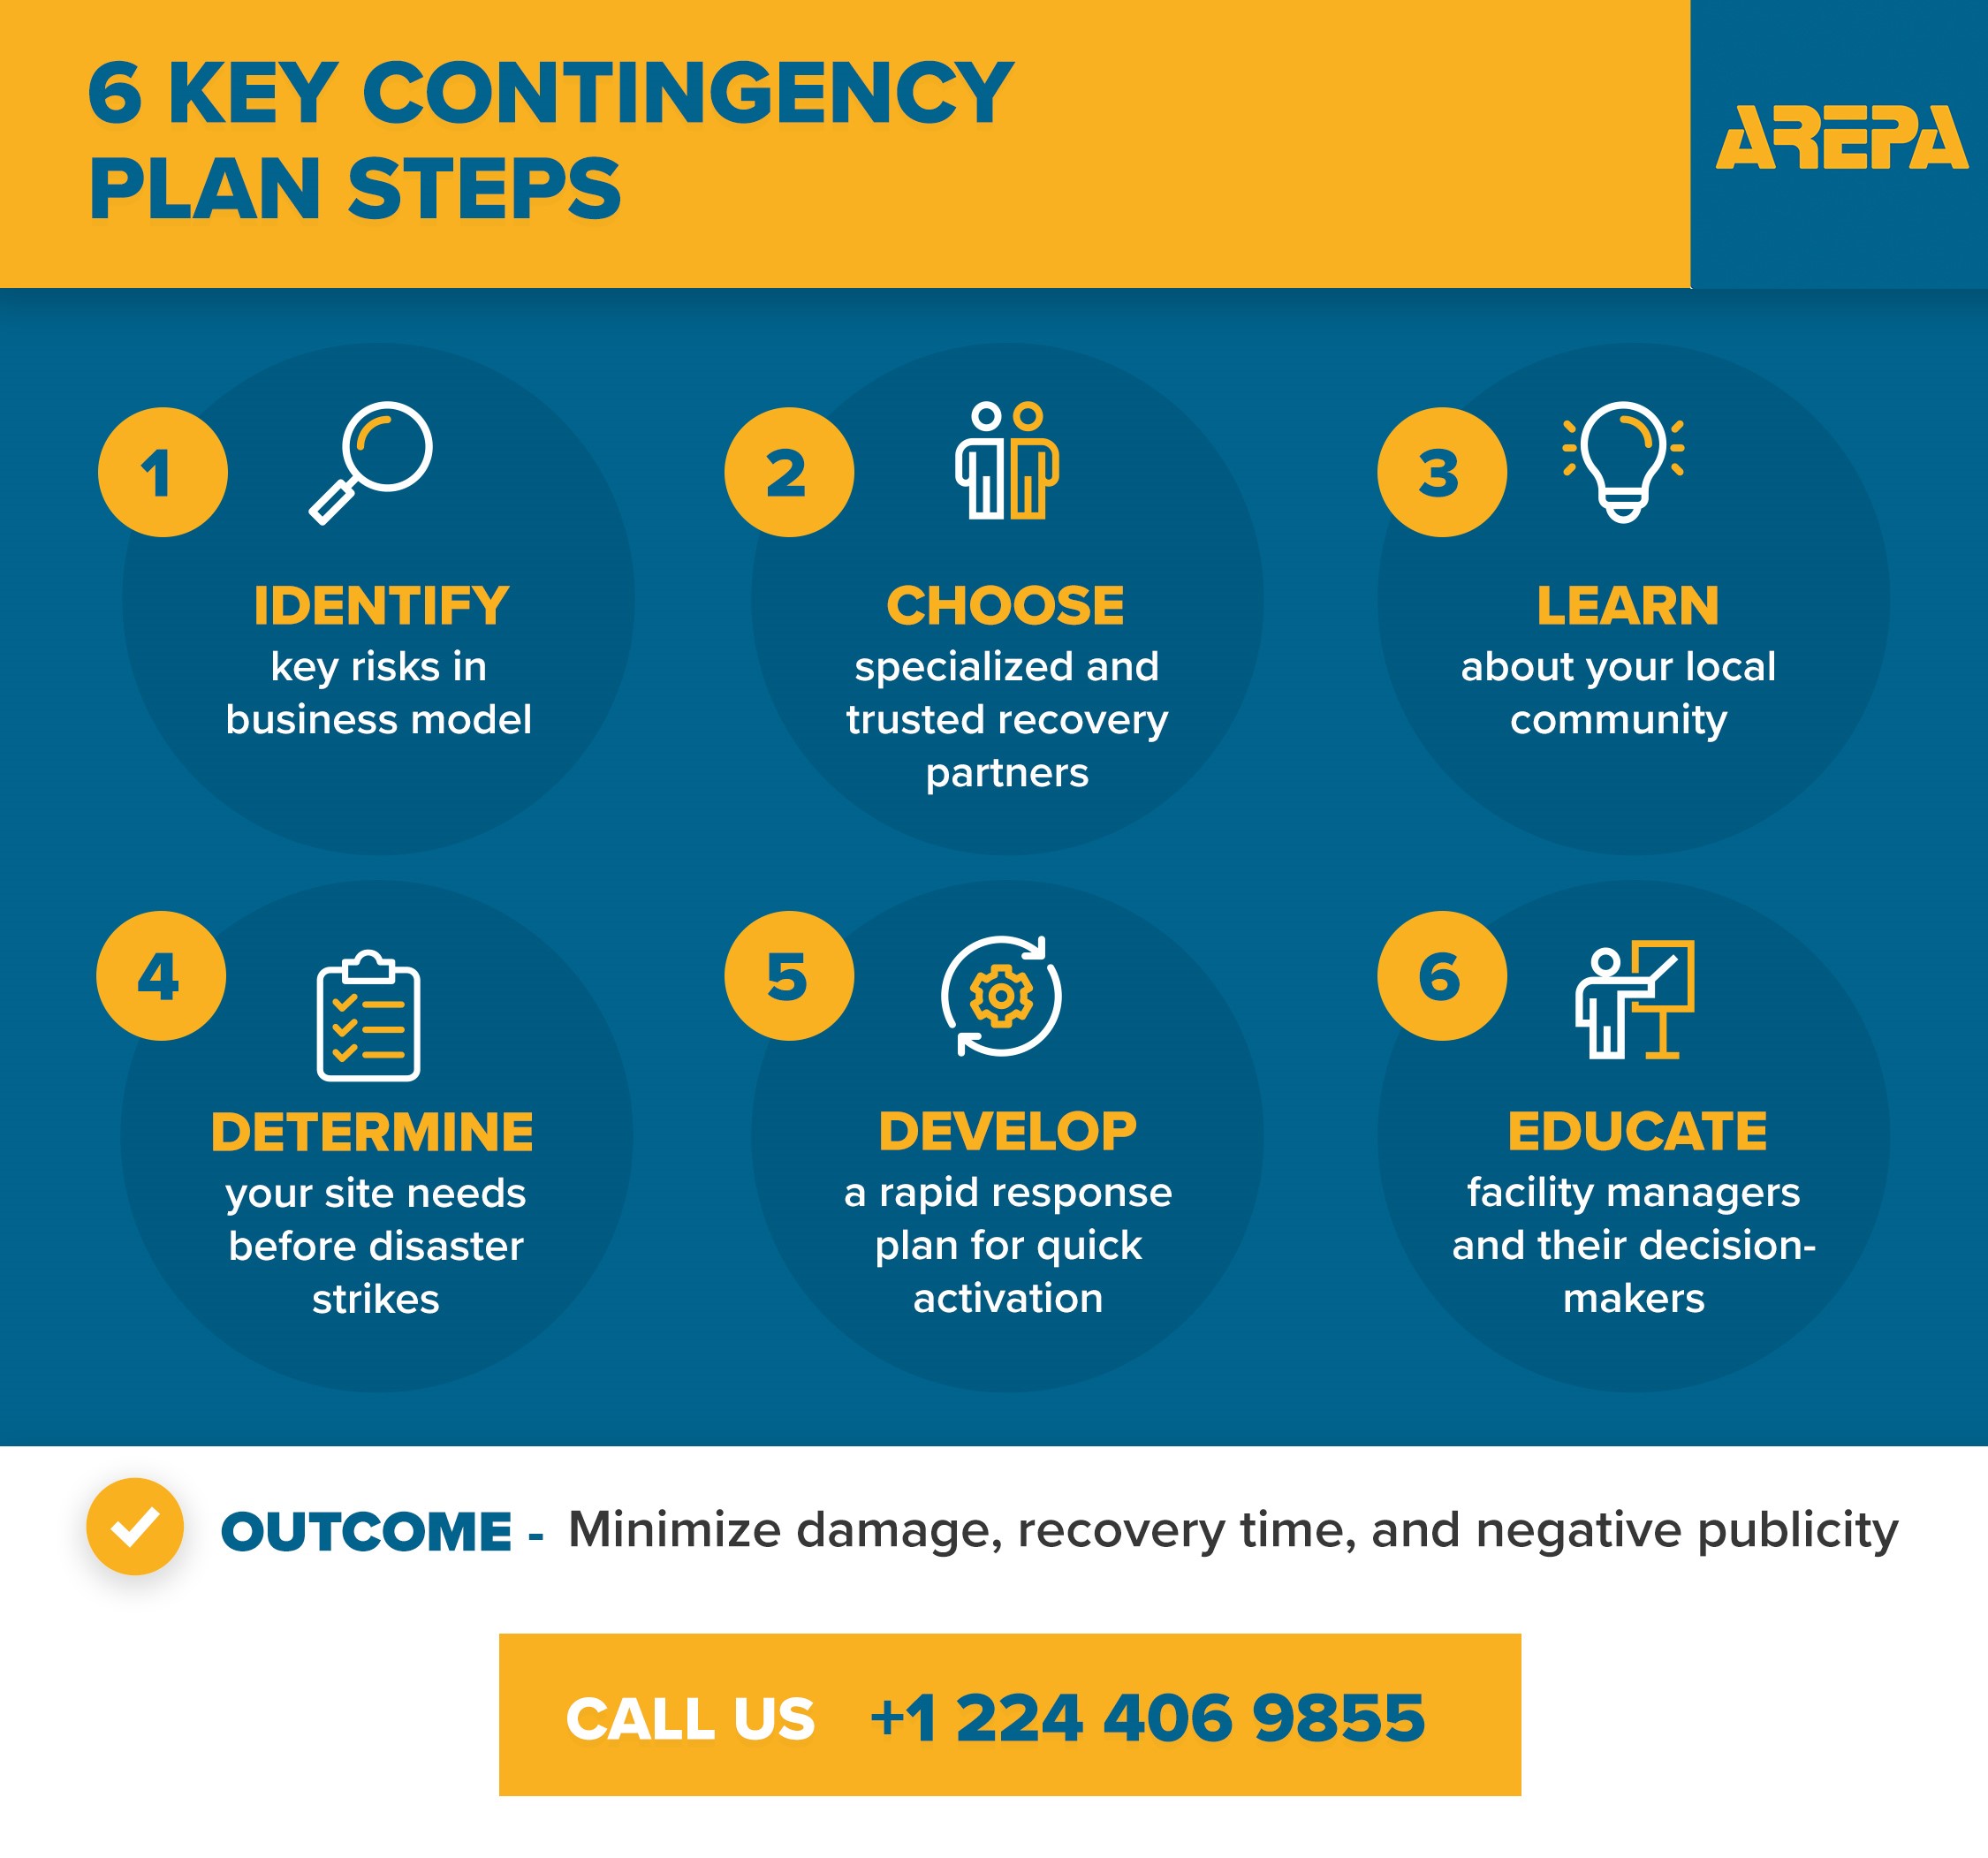 operational contingency plan meaning